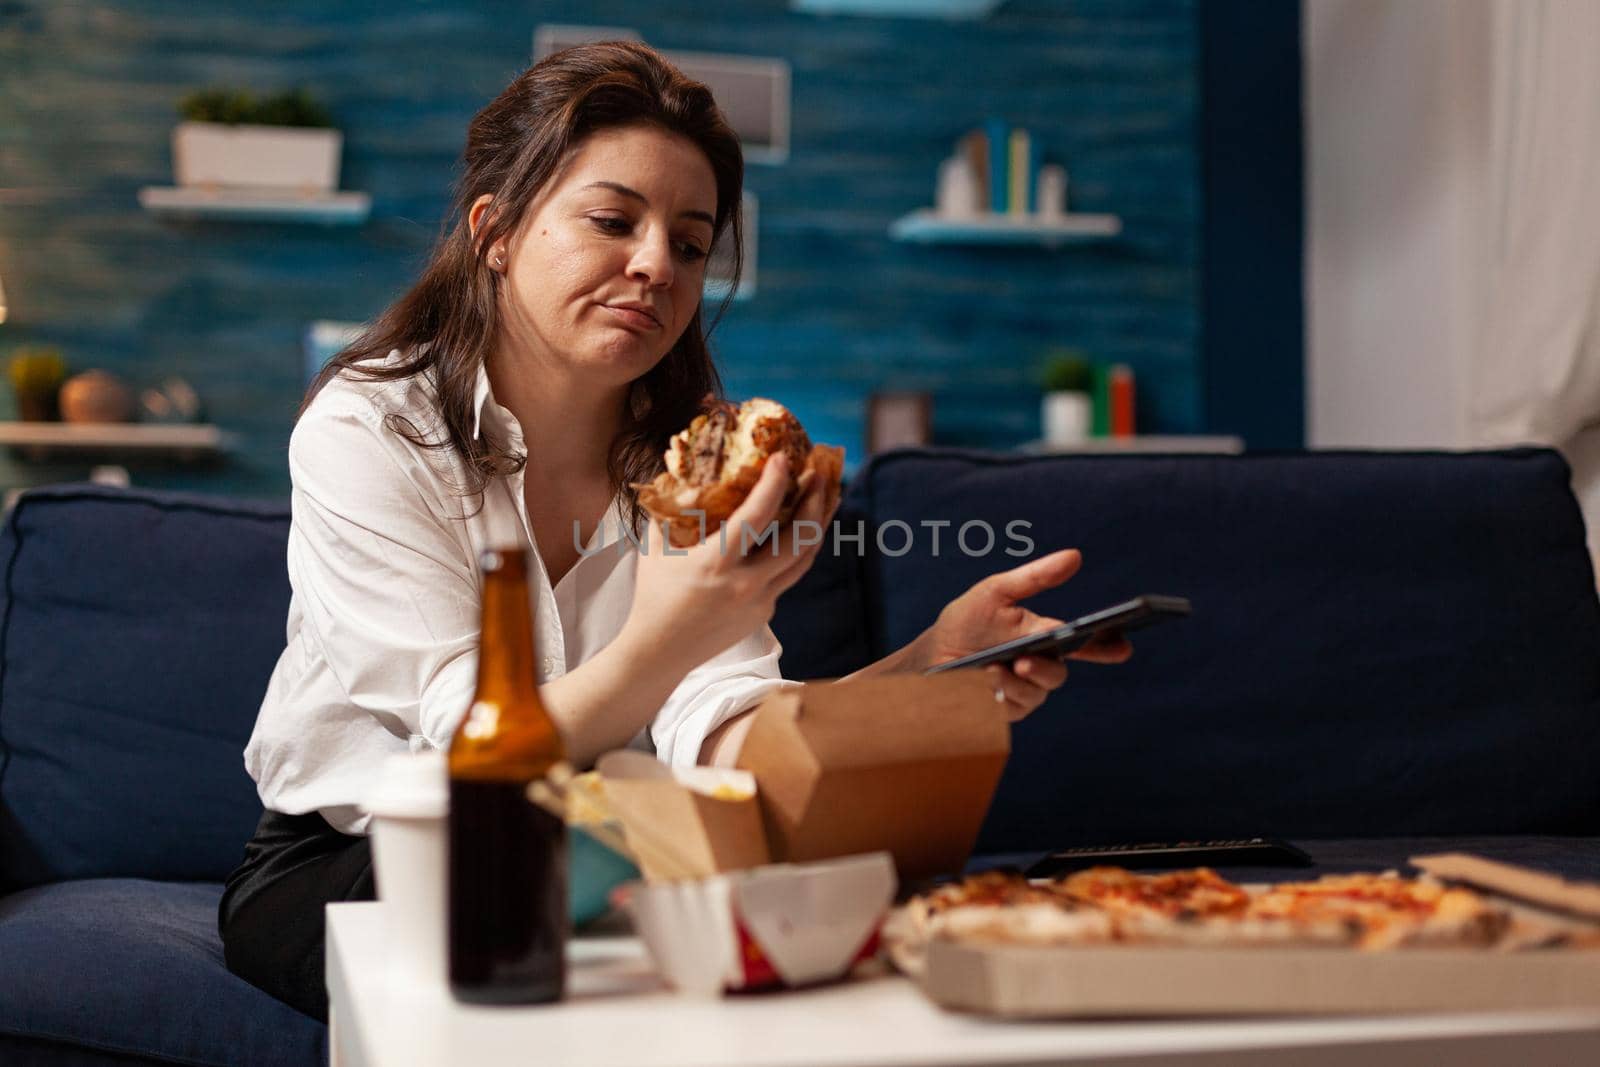 Caucasian female holding tastu burgery in hands browsing on social media using smartphone relaxing on couch during junck-food night. Woman enjoying takeaway food home delivery